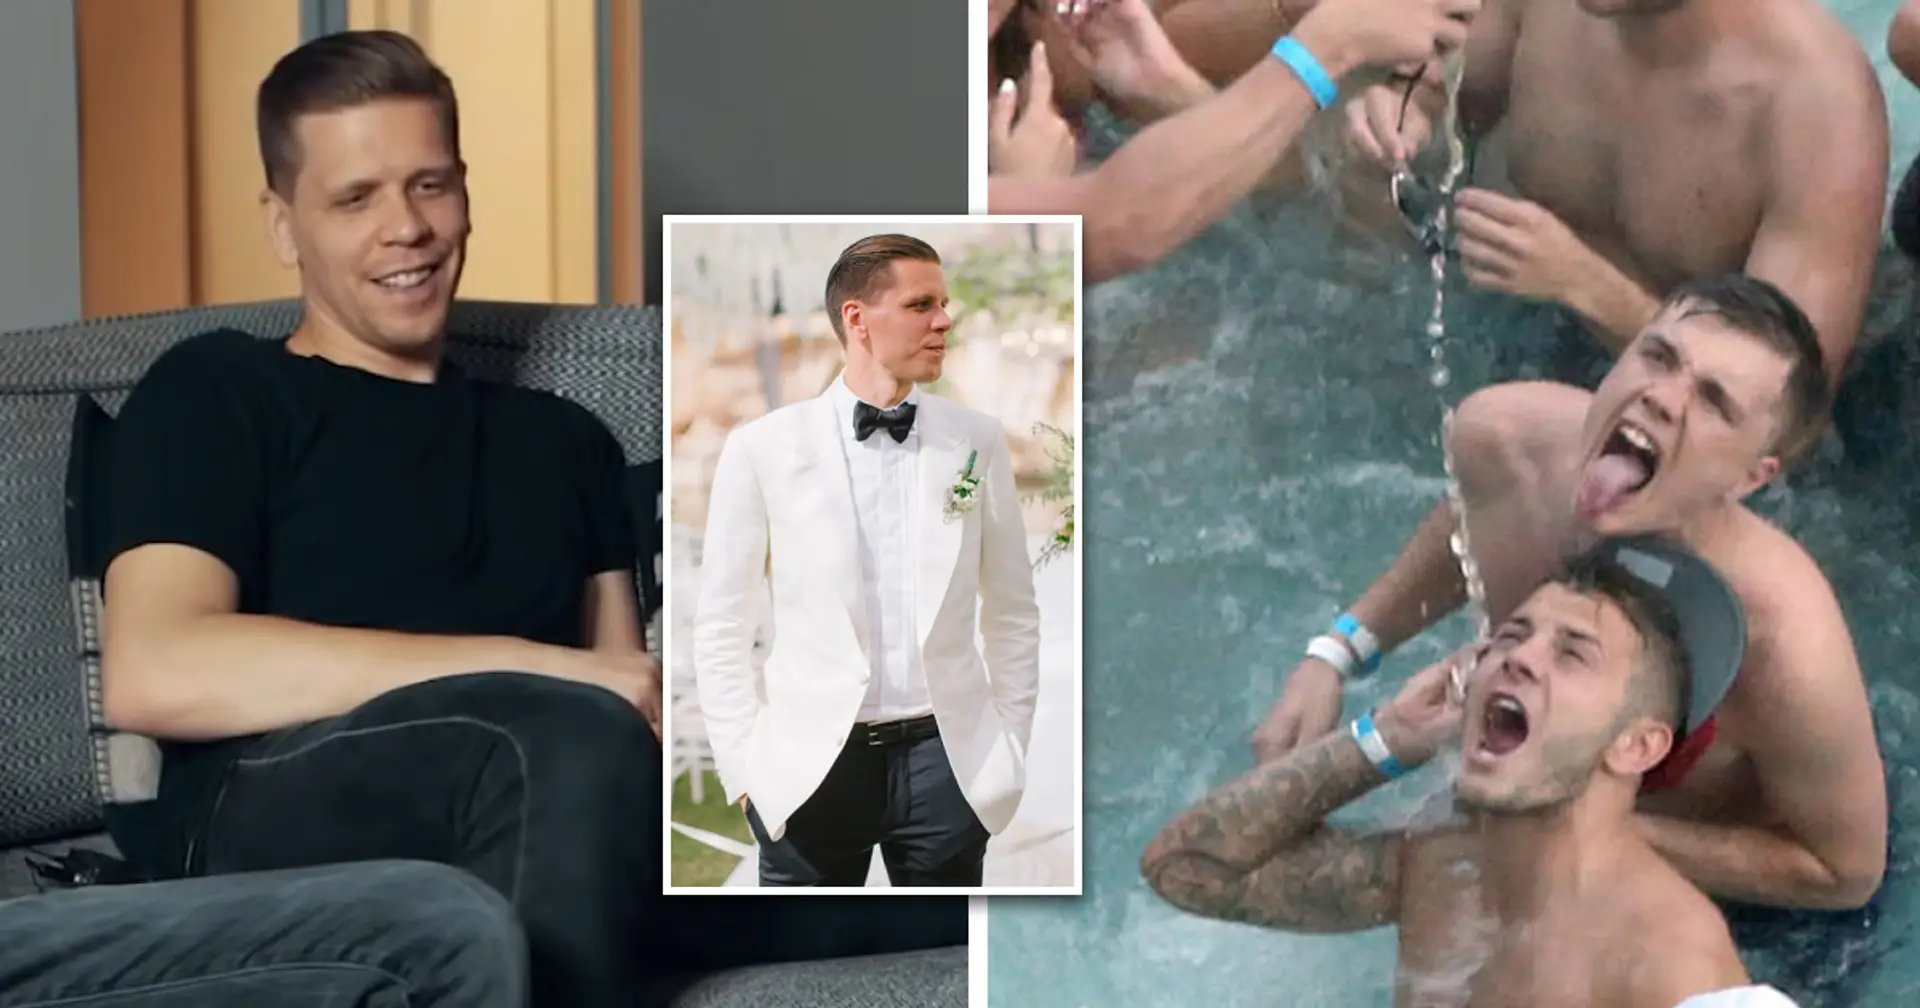 'He got so drunk at my wedding, we found him sleeping in bushes': Szczesny tells story about his former teammate